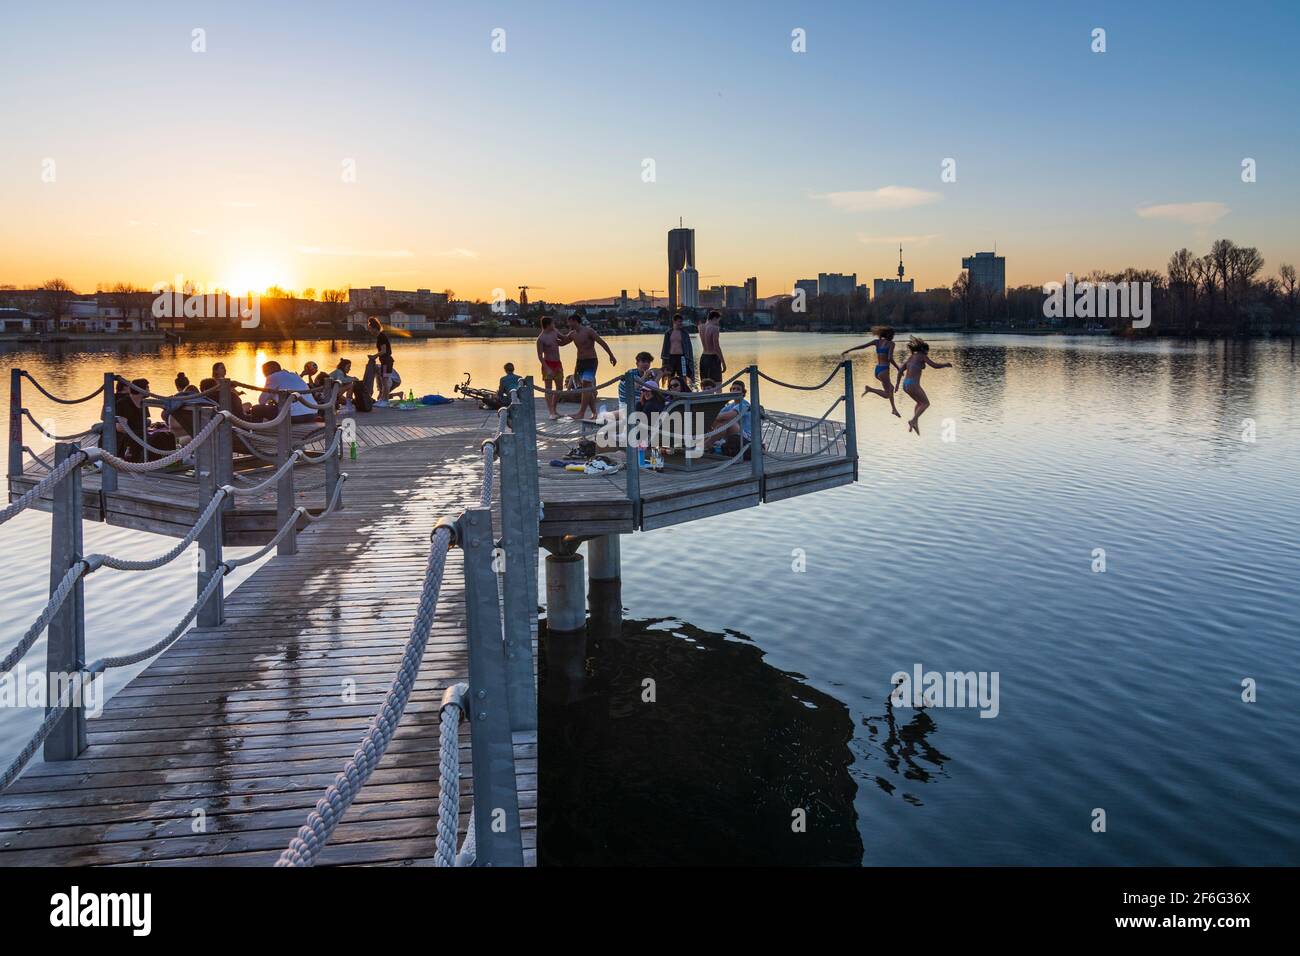 Wien, Vienna: girls jump into water of oxbow lake Alte Donau (Old Danube),  young people sitting on a platform above the lake, sunset, buildings of Don  Stock Photo - Alamy